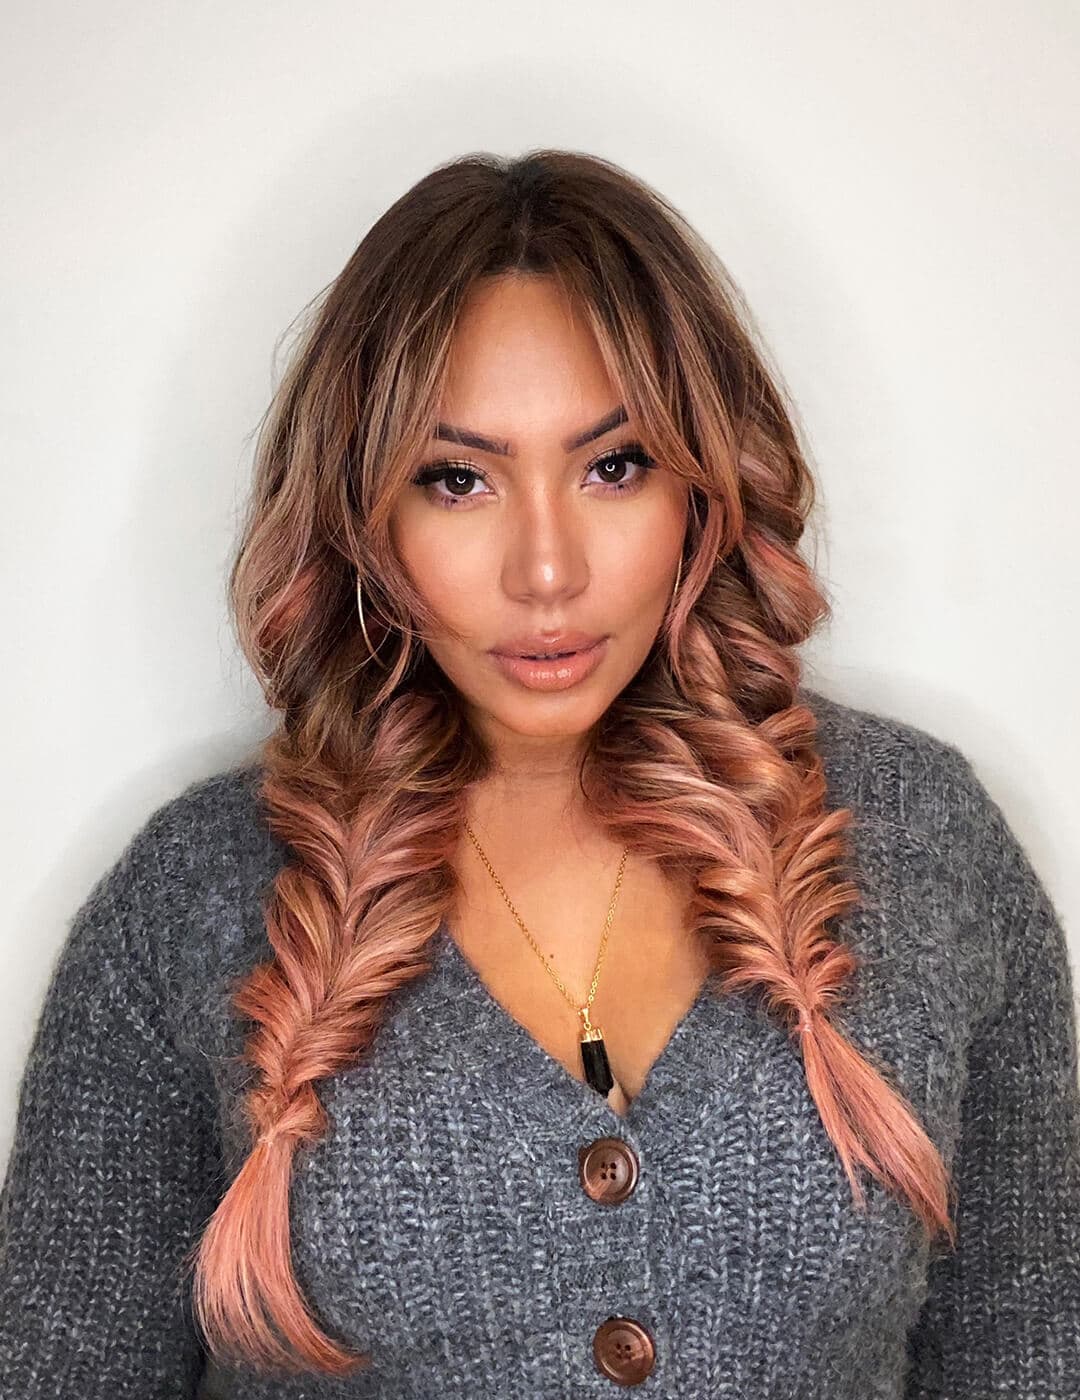 Profile image of Cynthia Alvarez wearing a dark gray cardigan and rocking a rose gold fishtail braided hairstyle